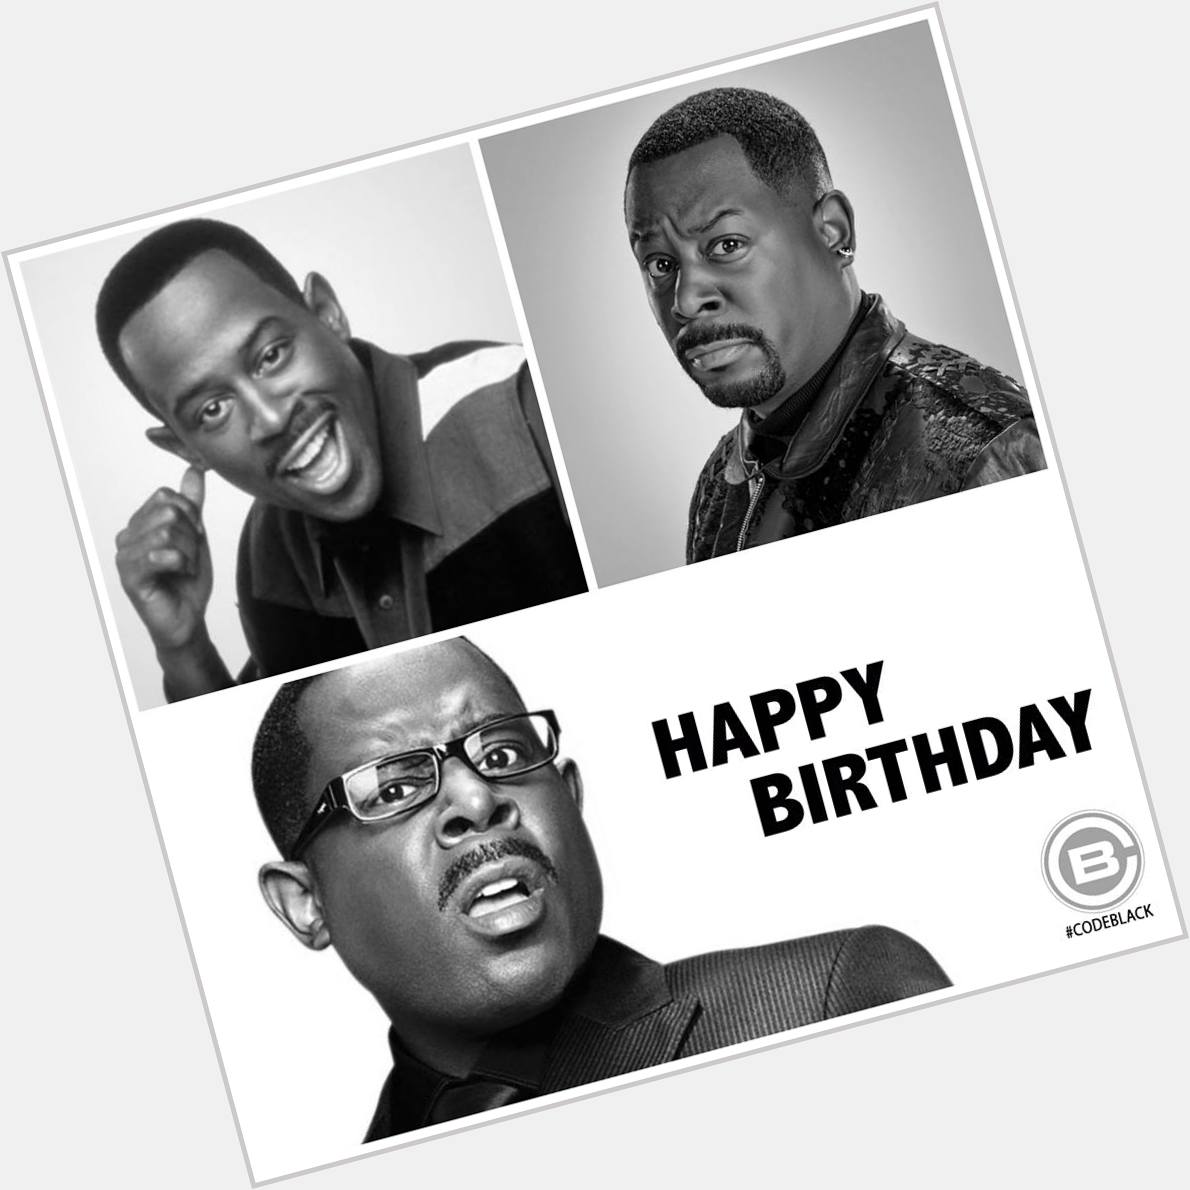 Happy Birthday to the man who has brought us many laughs over the years, Martin Lawrence 